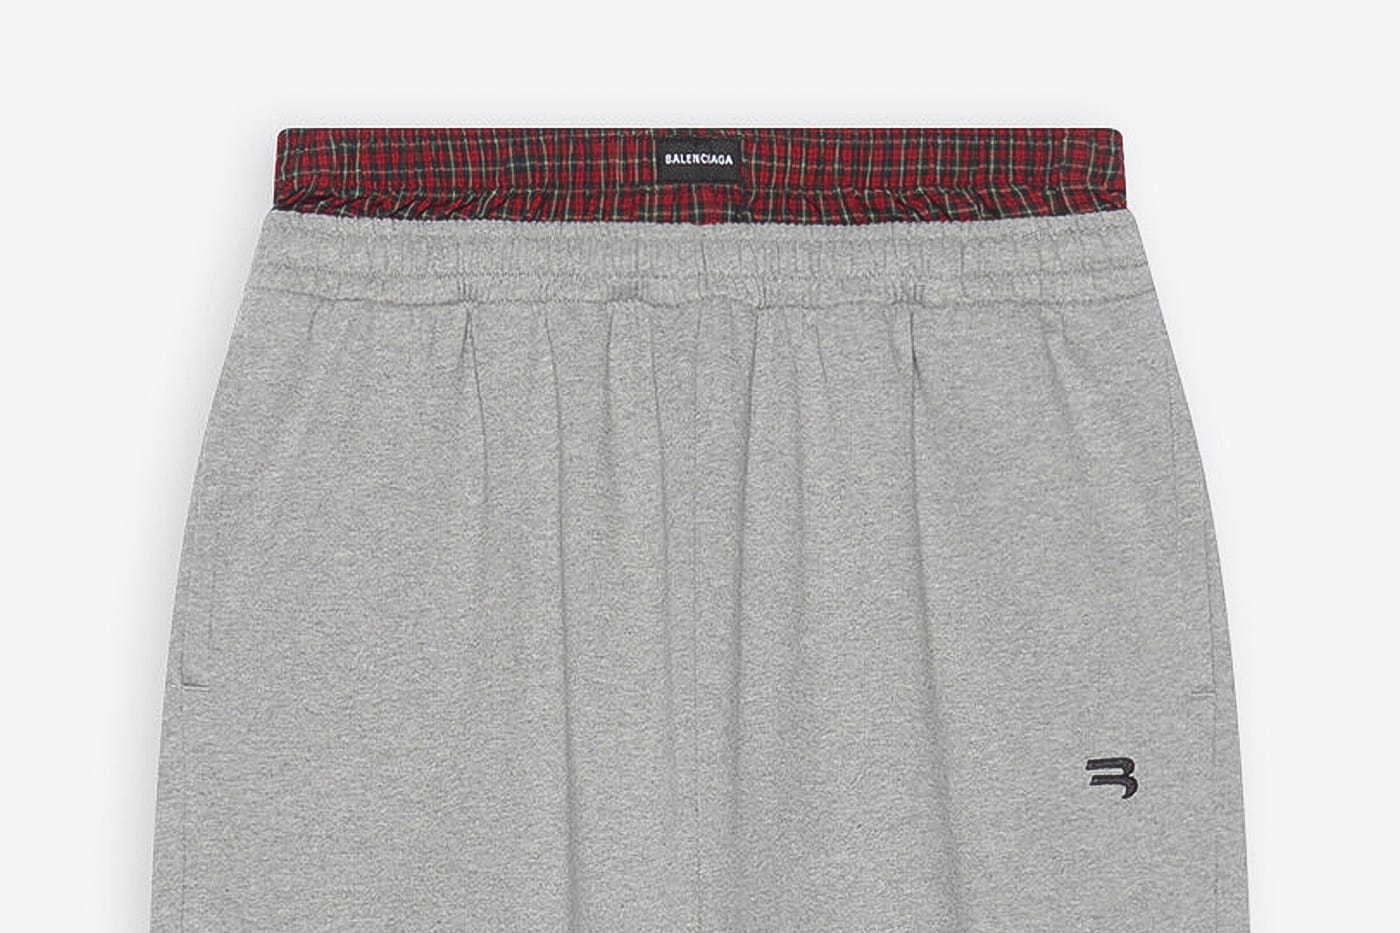 Balenciaga 1190 Sagging Sweatpants With Fake Boxer Briefs Branded Racist